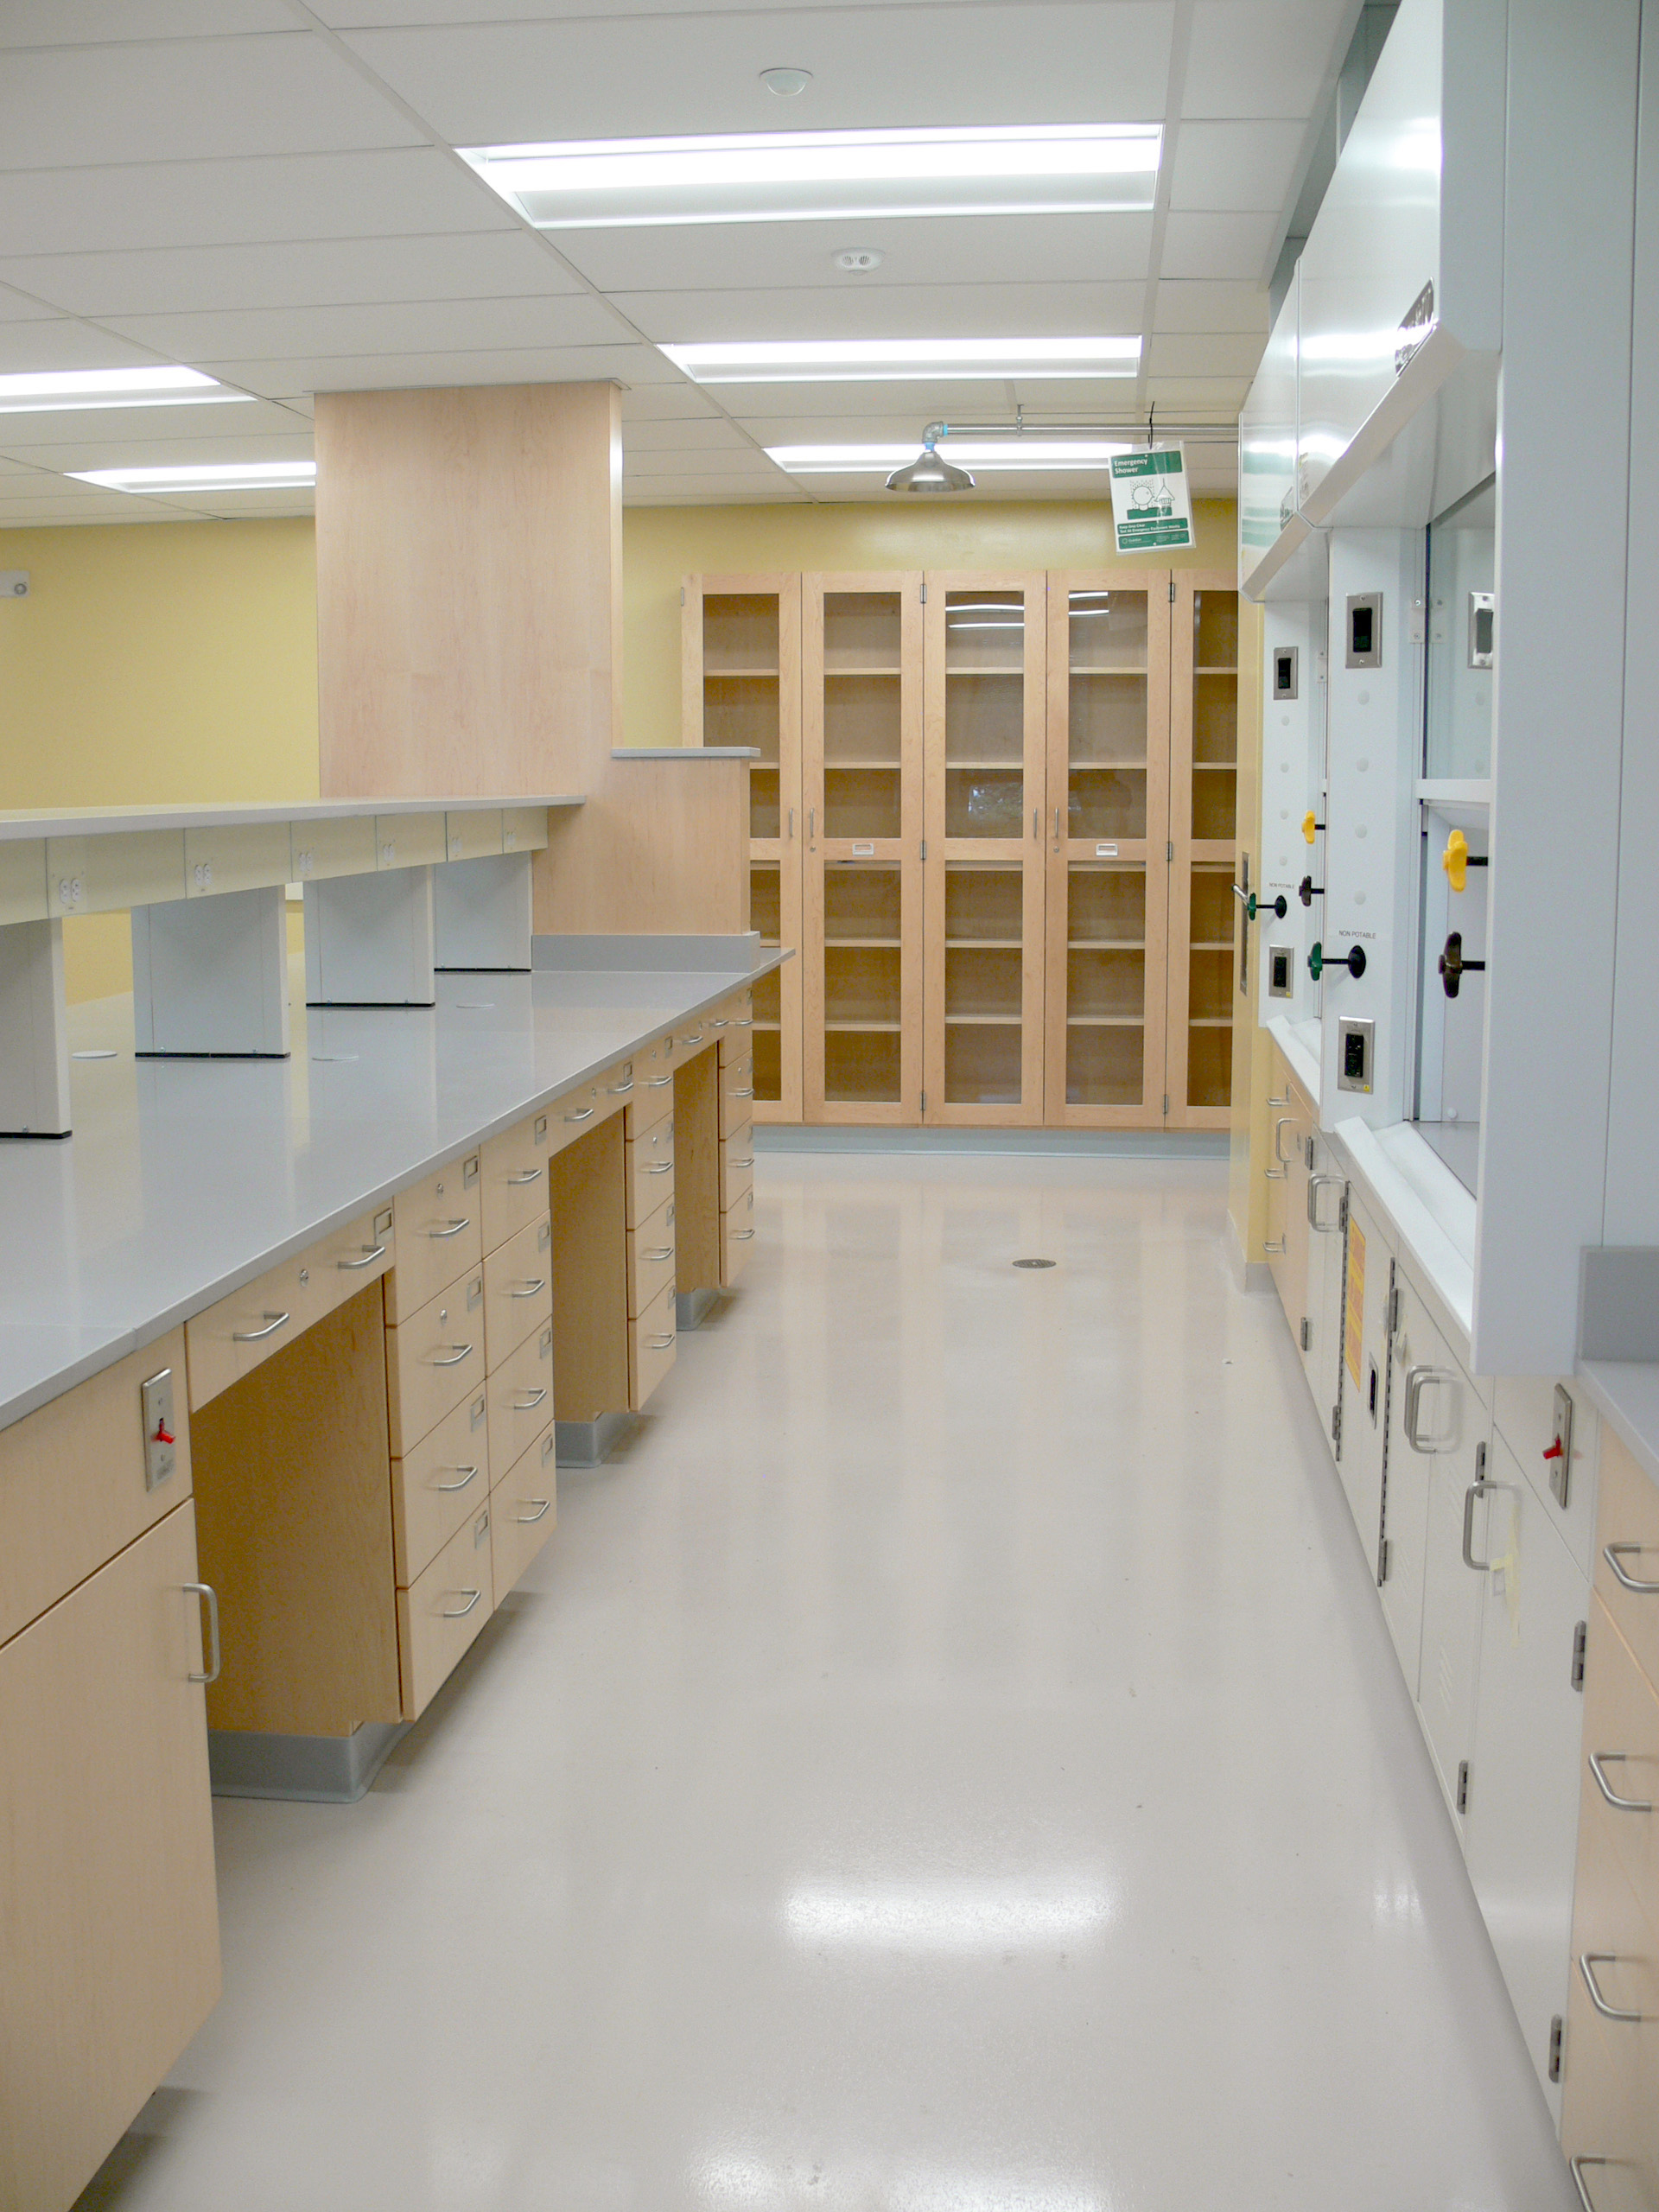 Interior, Olney Research Laboratory at UMass Lowell, work stations and storage